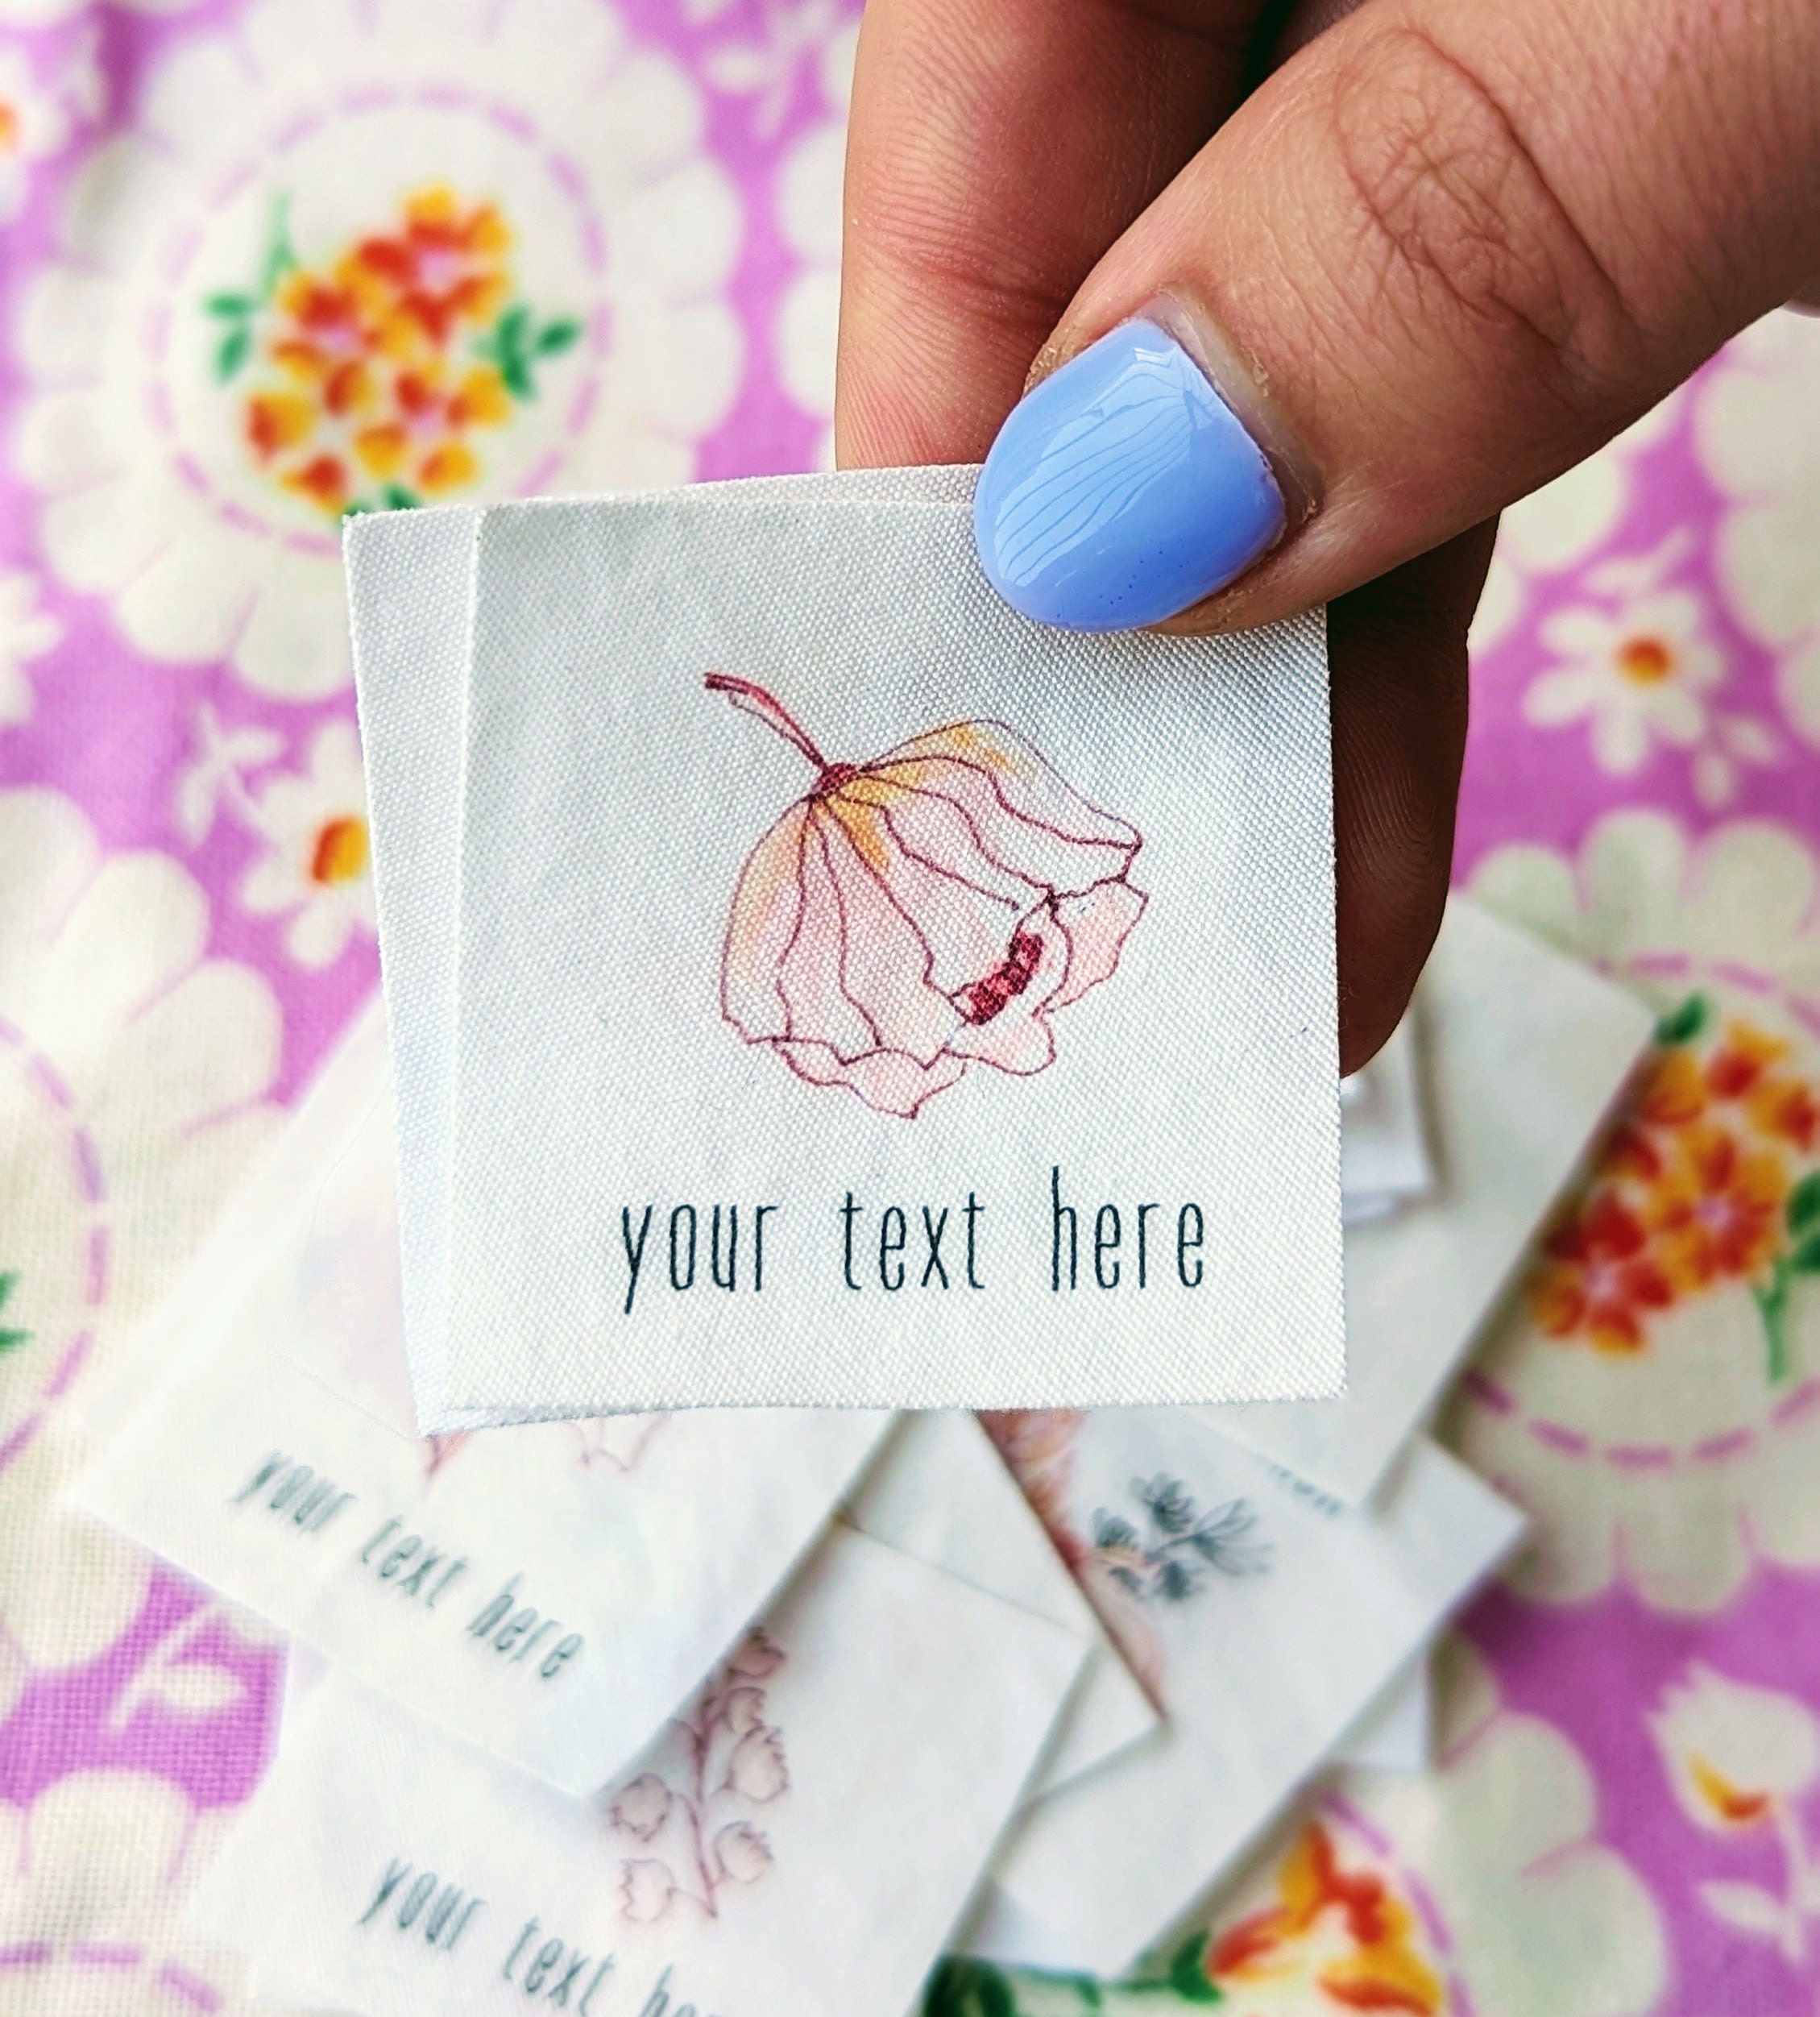 Watercolor Floral Logo Labels for Handmade Items 100% Cotton Personalized  Tags With Calligraphy Script, for Sewing Projects or Weddings 